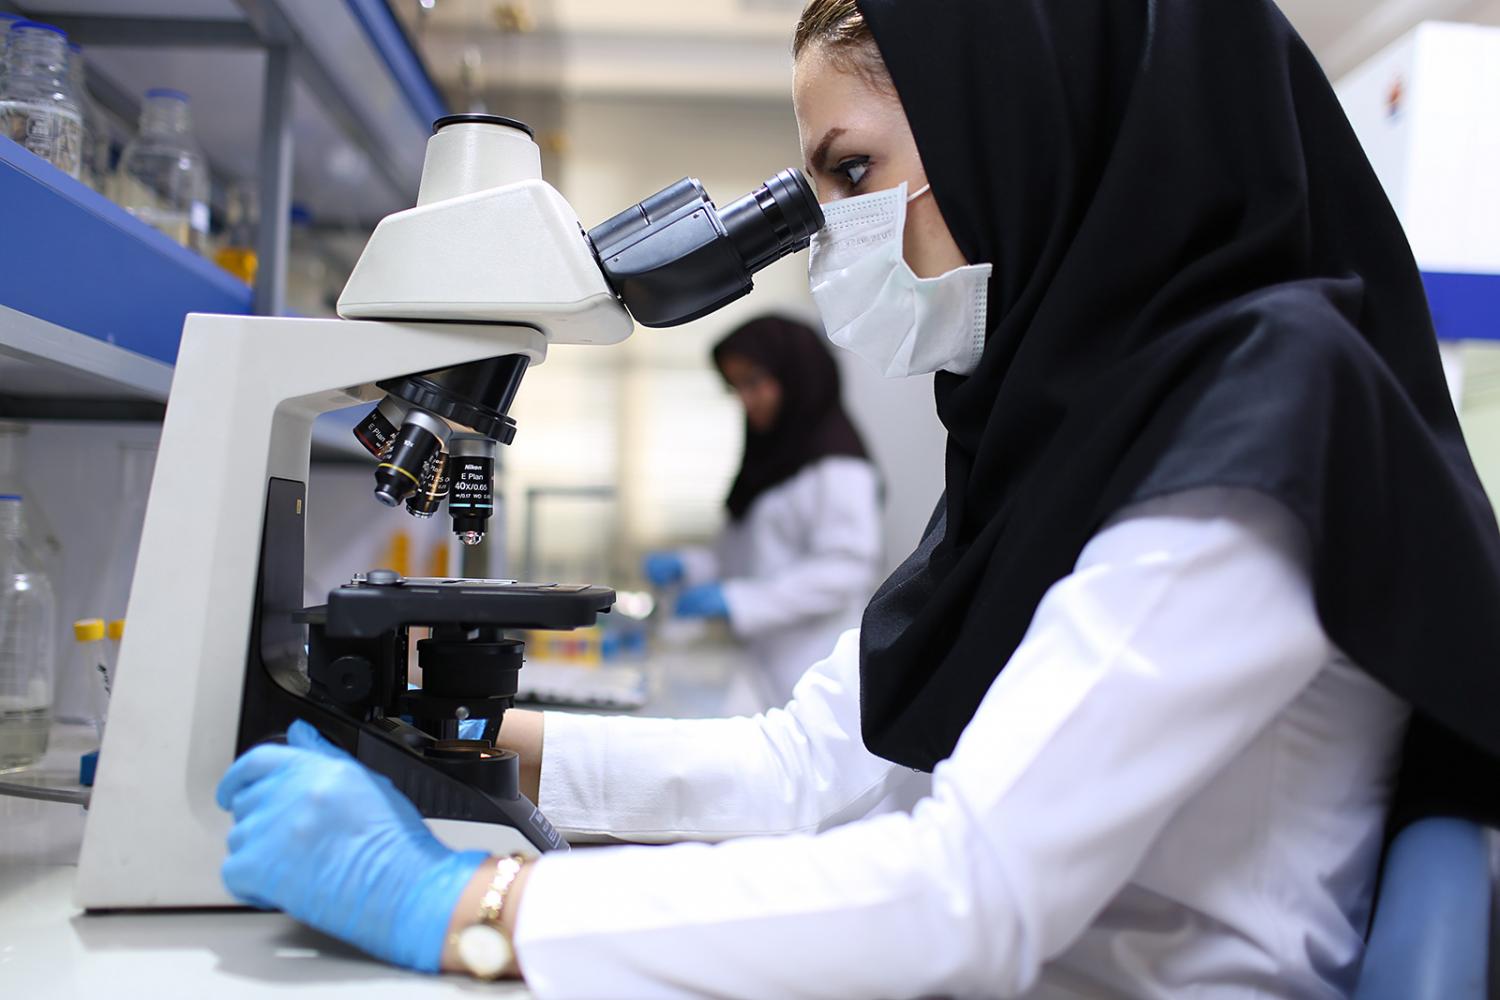 New era' in Iran science with end of sanctions: report